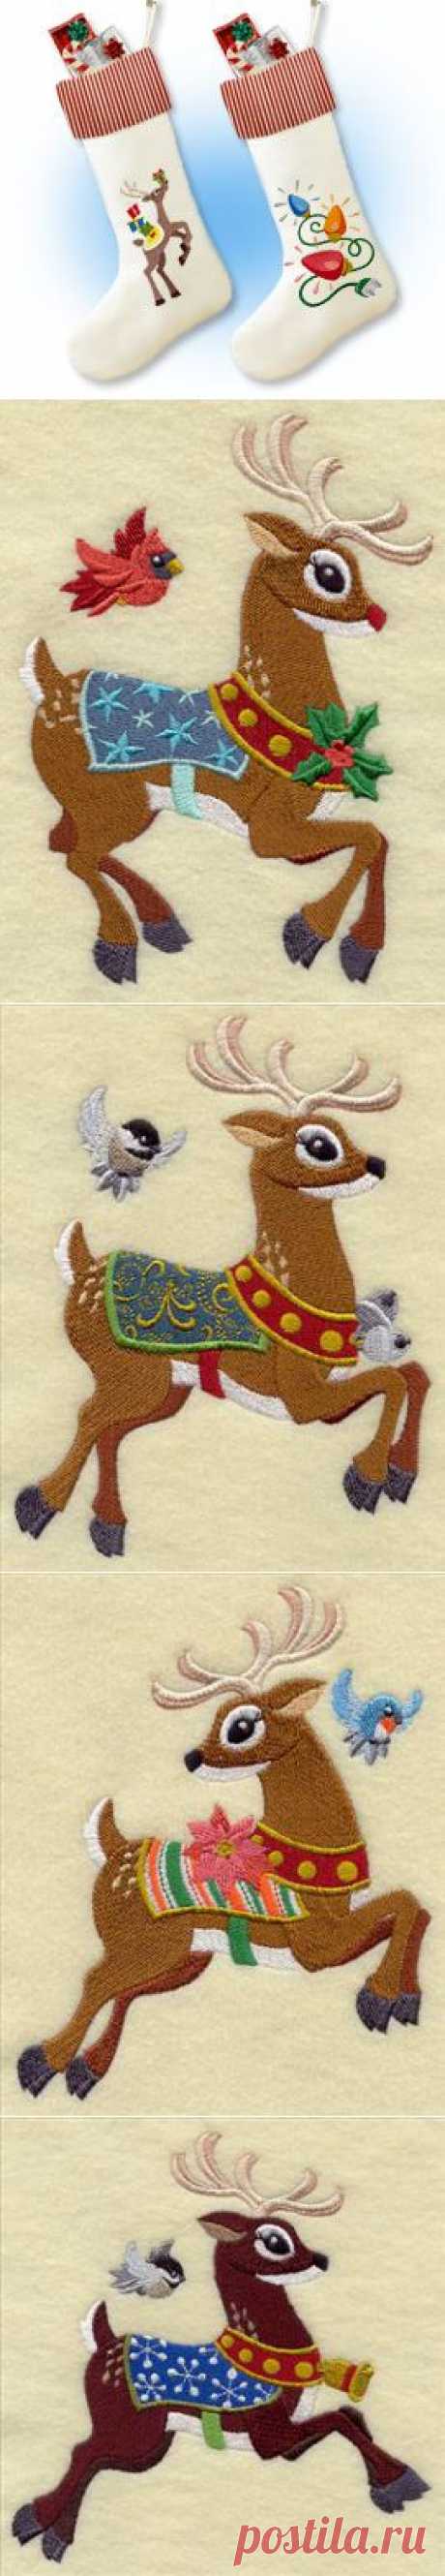 Machine Embroidery Designs at Embroidery Library! - New This Week